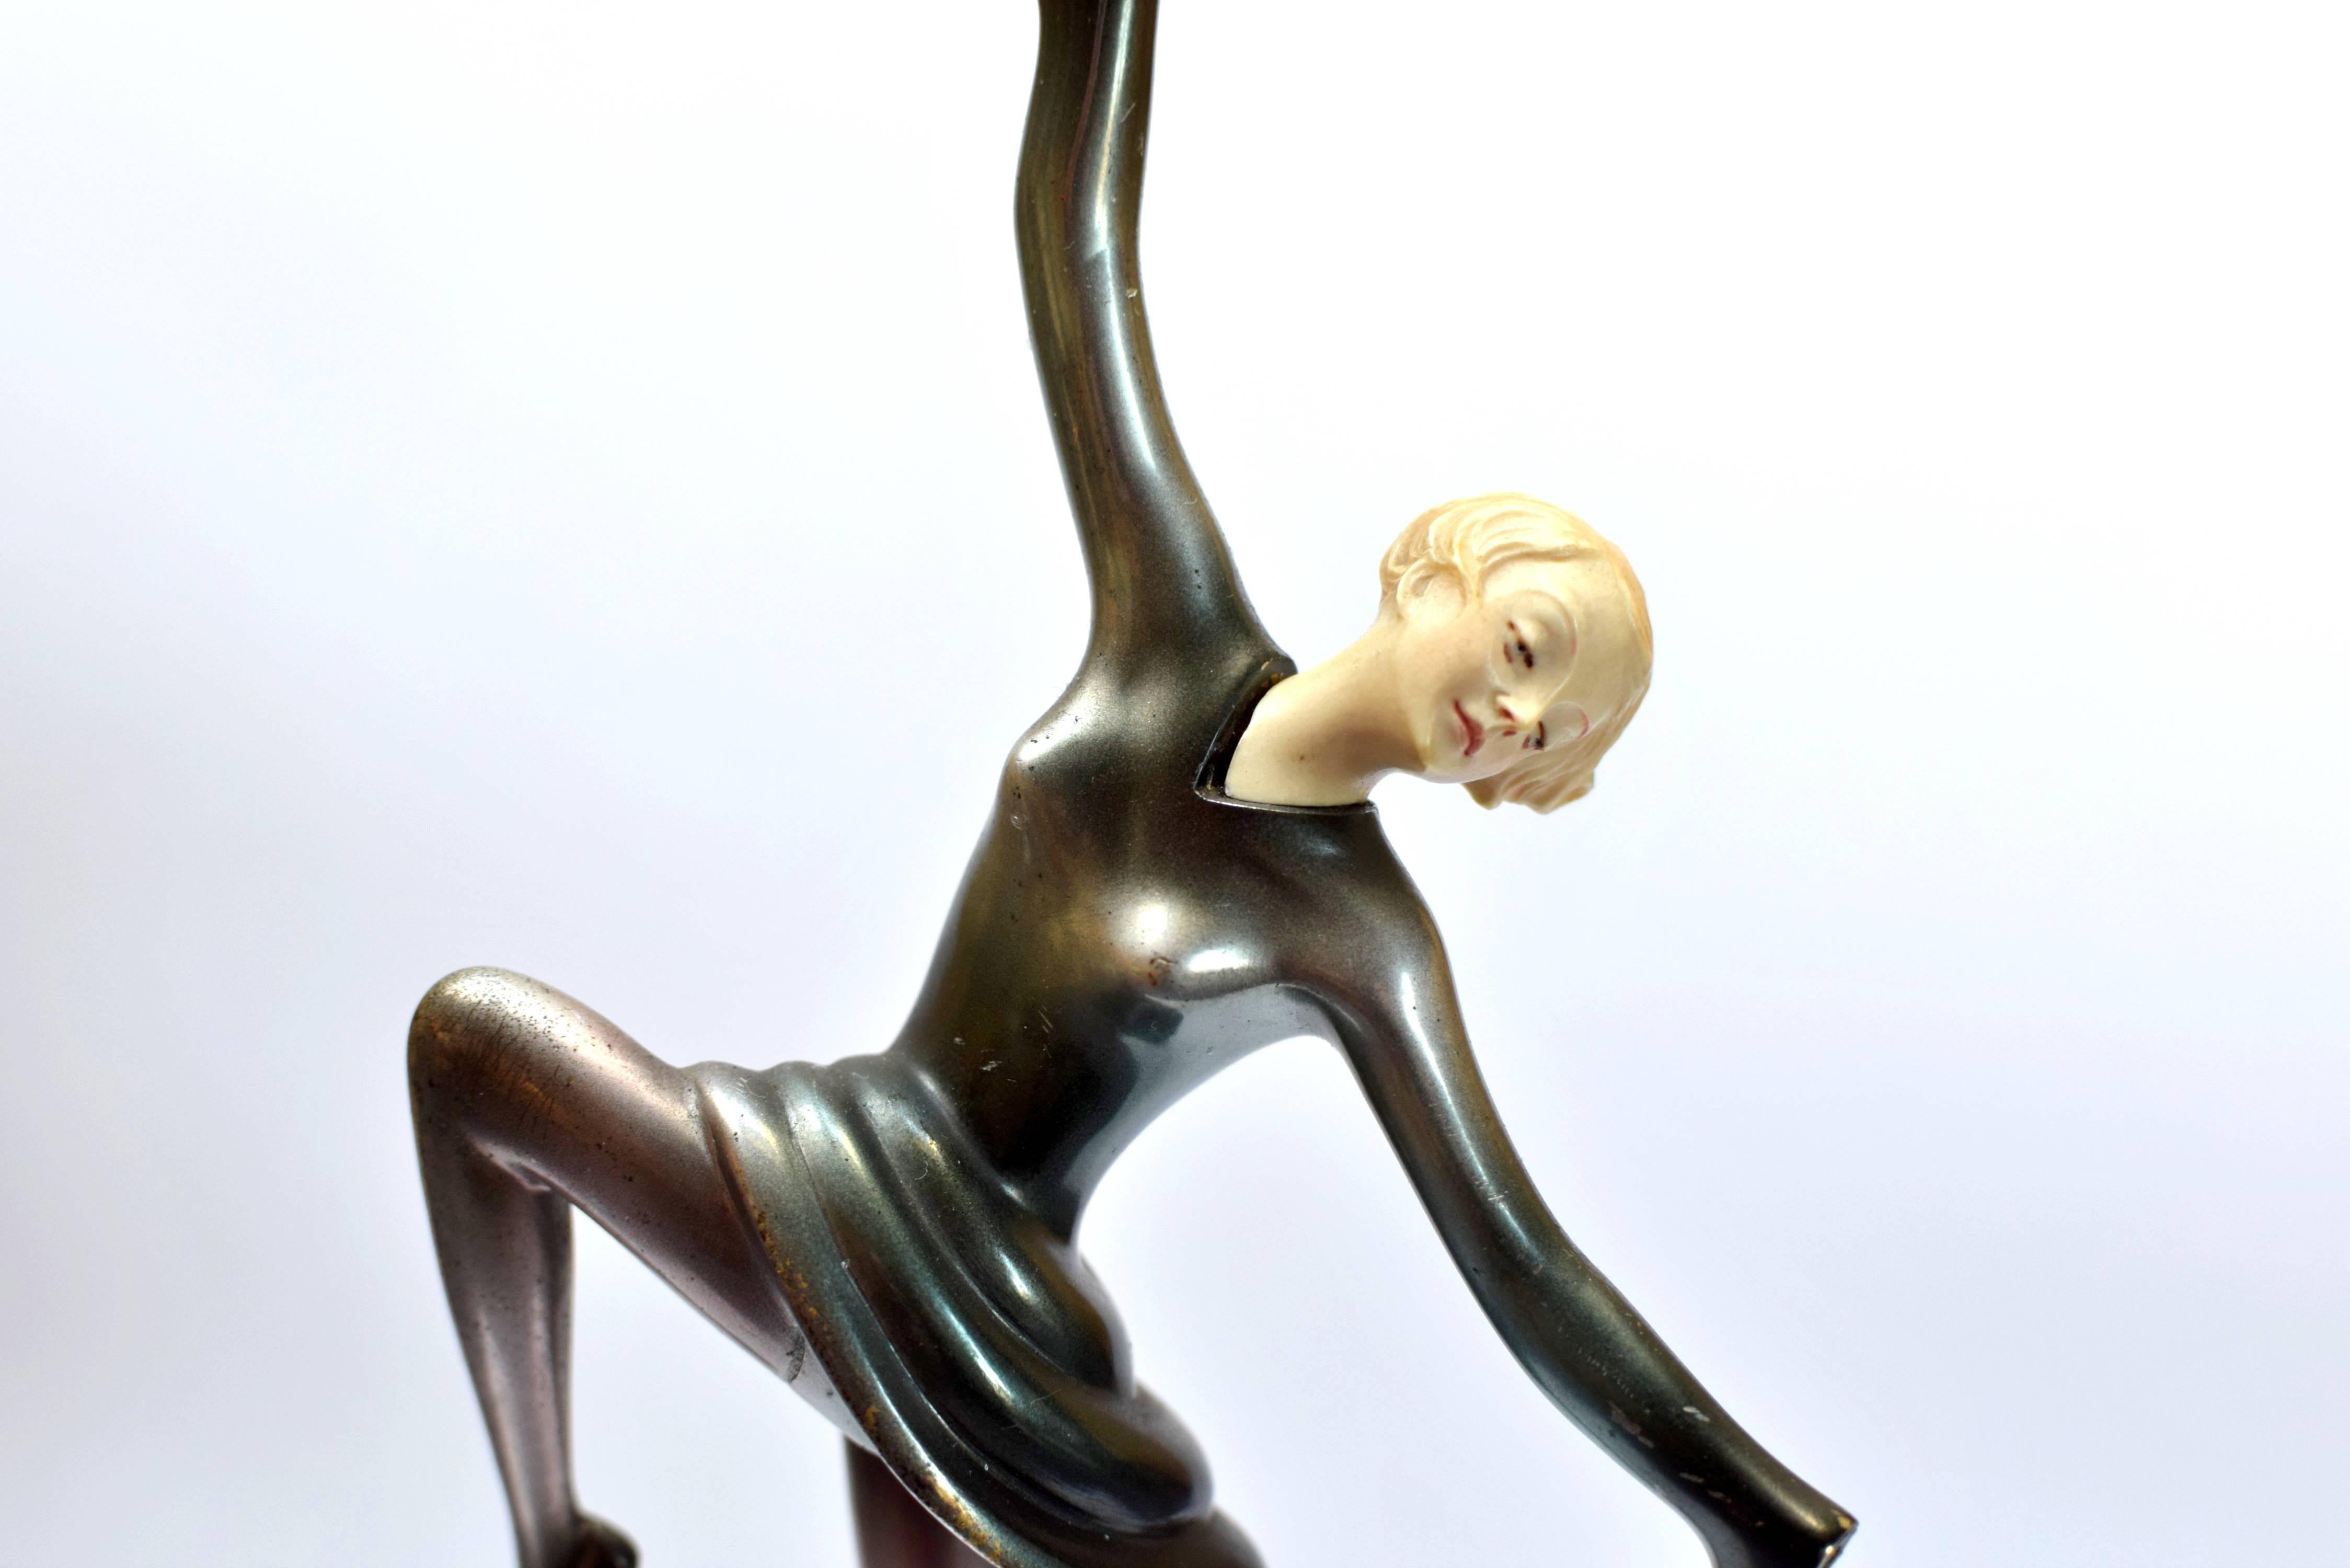 A superb bronze and ivorine sculpture with a gold, silver and enameled cold-painted finish, mounted on an onyx base.
Height 23,5 cm.
Signed Lorenzl.

Both hands are missing!